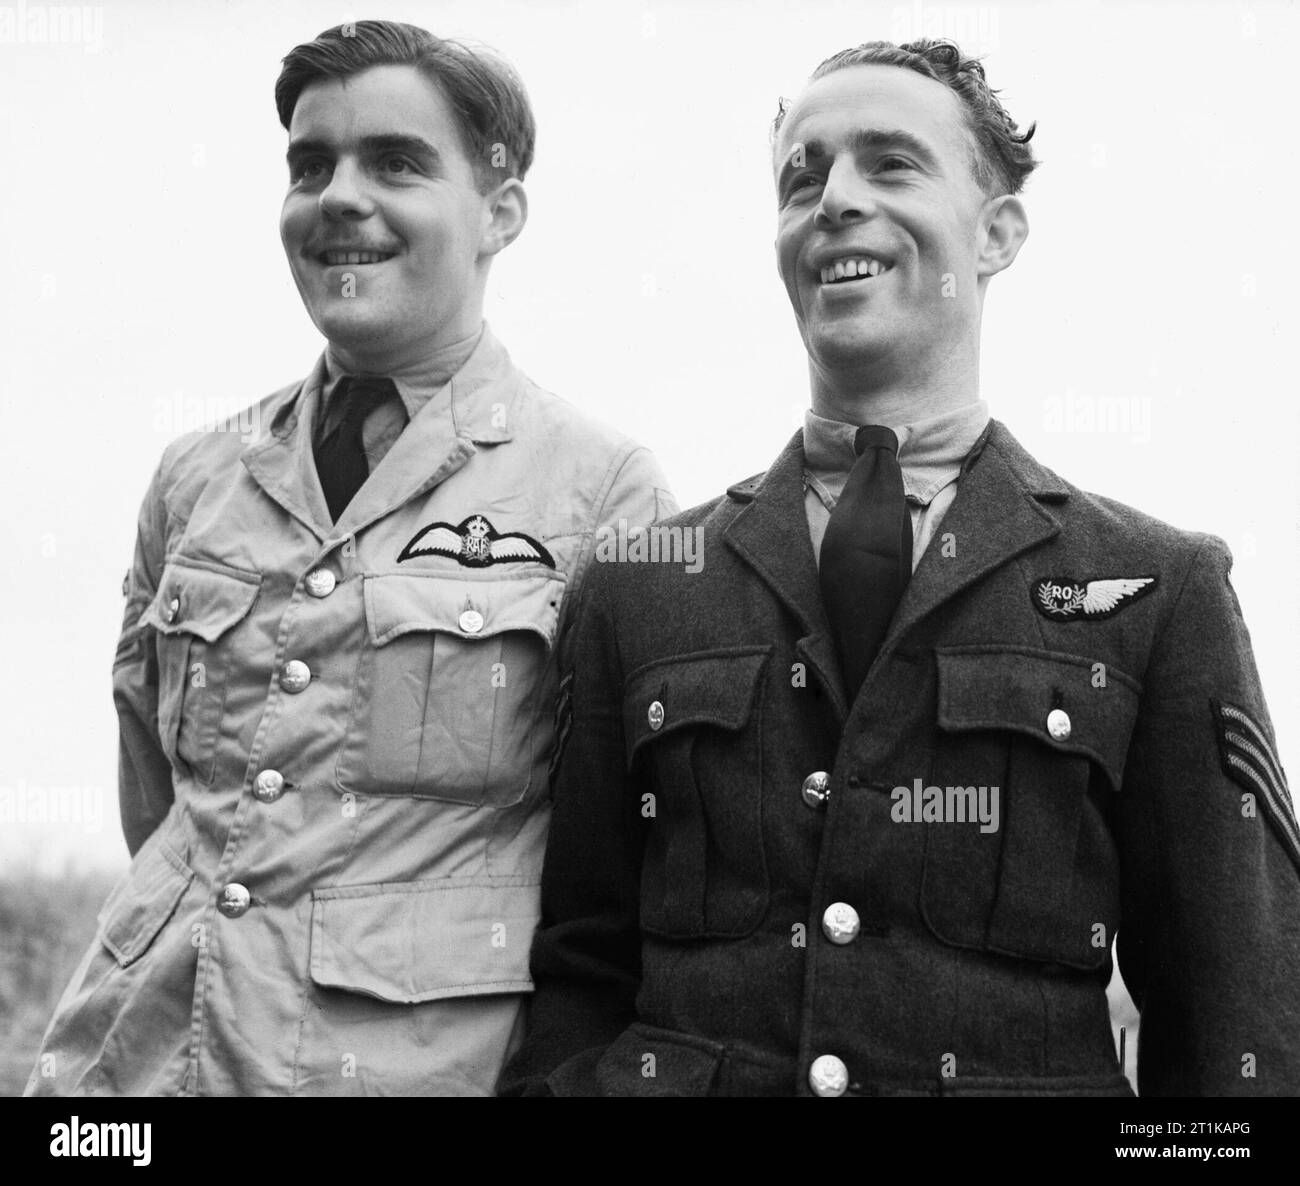 Royal Air Force Operations in the Middle East and North Africa, 1939-1943. Flight Sergeant A B Downing (pilot, left), and Sergeant J T Lyons (radar operator, right), a successful night-fighter crew of No. 600 Squadron RAF, smile for the photographer at Bone, Algeria, on the day after they shot down five Junkers Ju 52 transport aircraft in ten minutes. Downing and Lyons, attached to No. 153 Squadron RAF at the time, intercepted the German formation while on a patrol 30 miles south of Cagliari, Sardinia in the early morning of 30 April 1943. They were awarded the DFM for this sortie and commissi Stock Photo